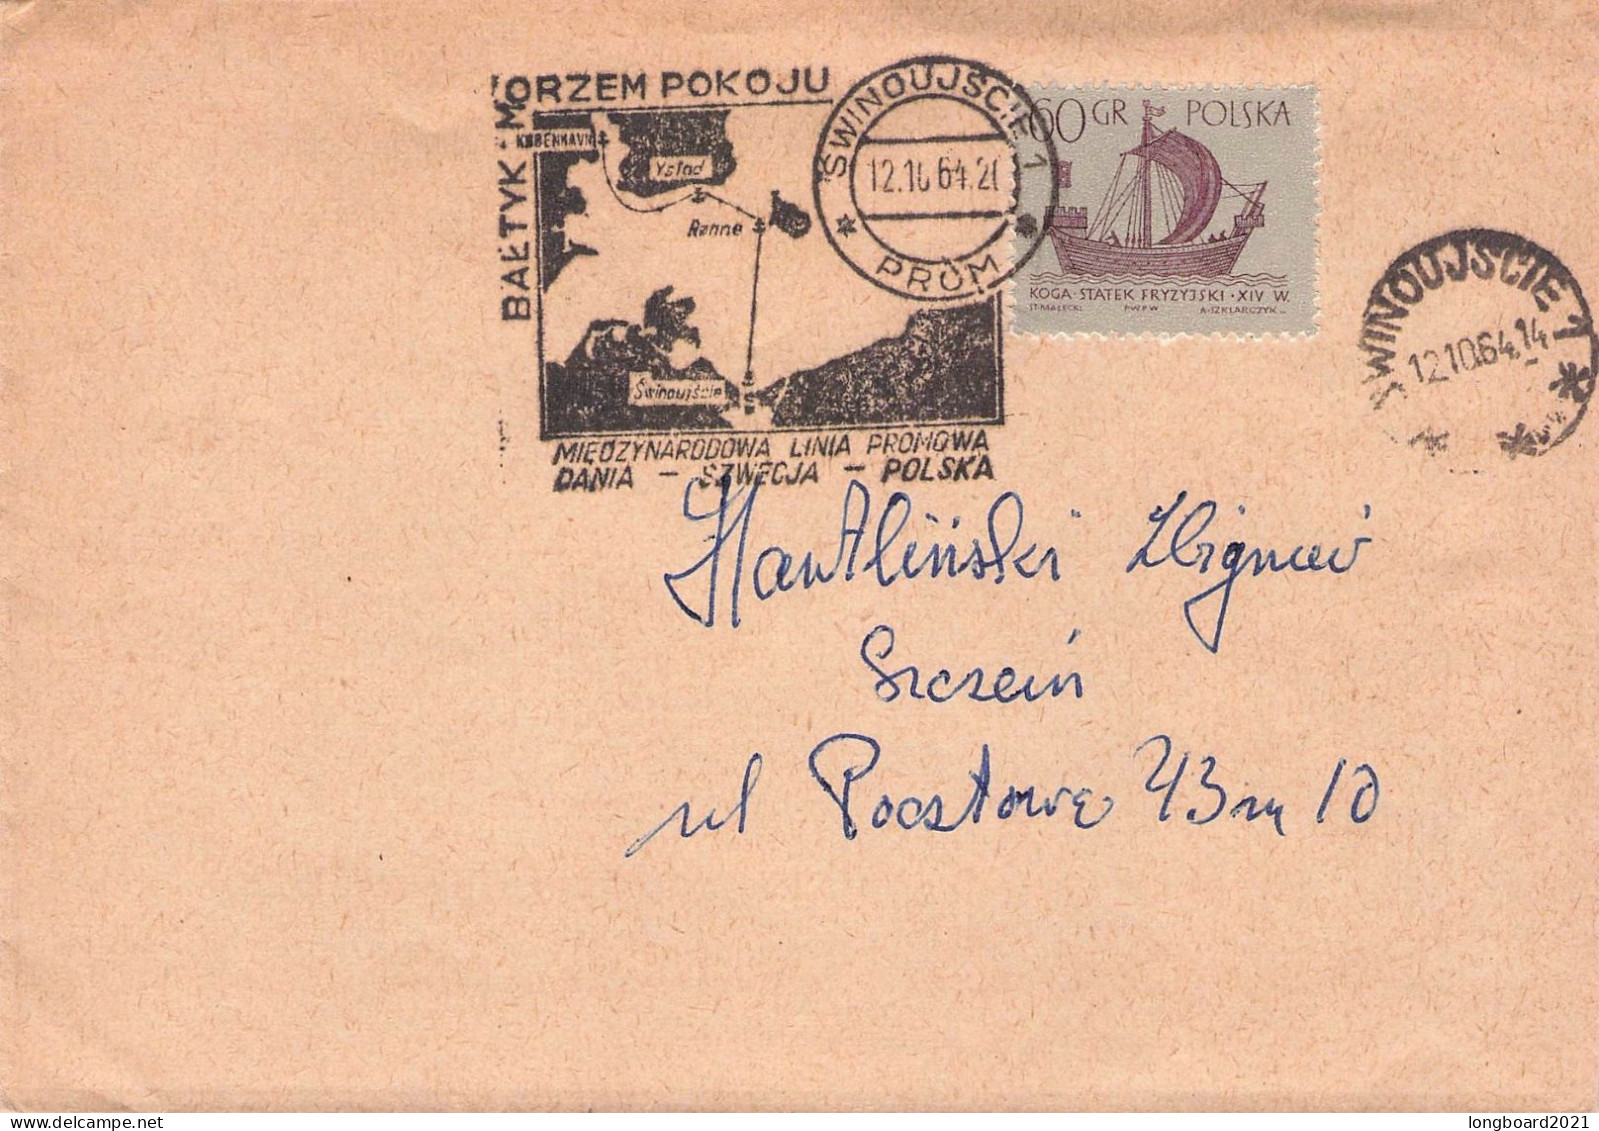 POLAND - SPECIAL CANCELLATION SWINOUJSCIE -FERRY- 1964  / 7018 - Covers & Documents